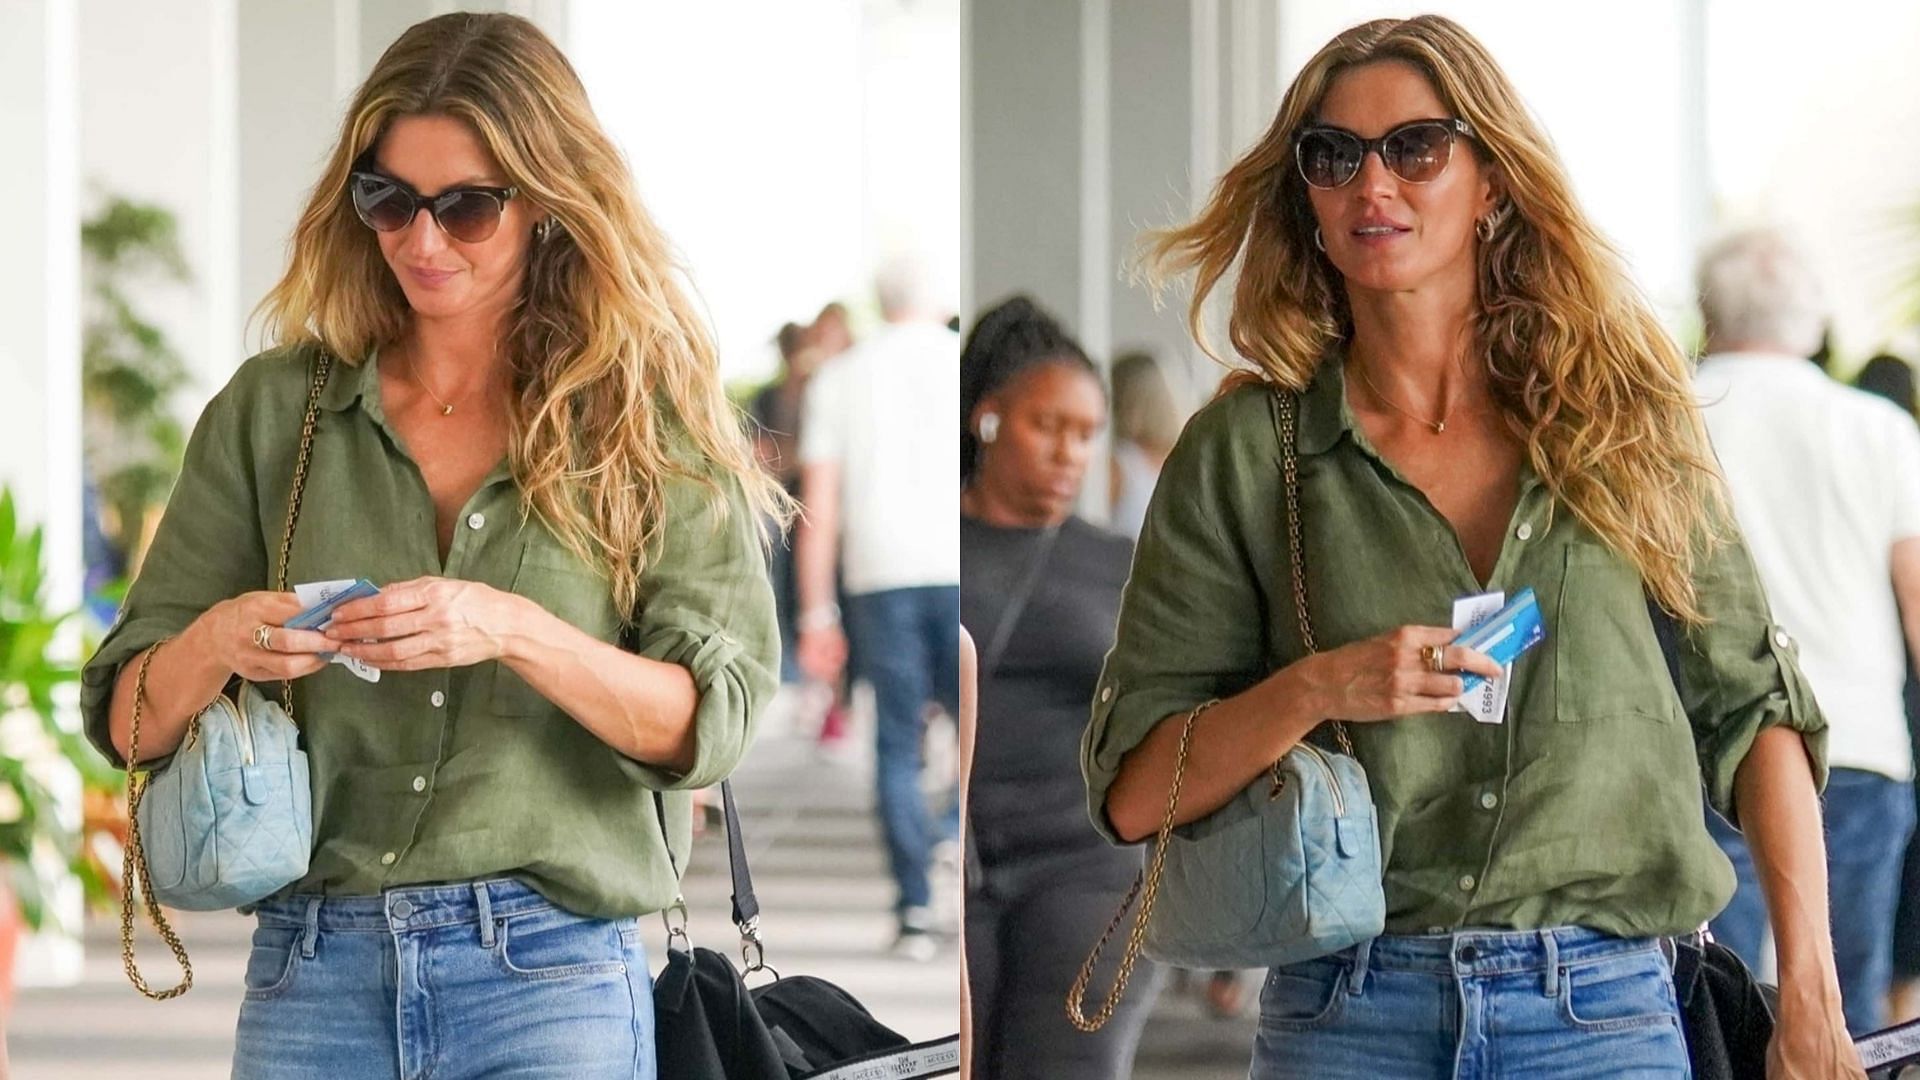 Brazilian supermodel Gisele Bundchen wears a casual attire while visiting a shopping district in Miami, Florida. (Image from meaww.com via BackGrid)